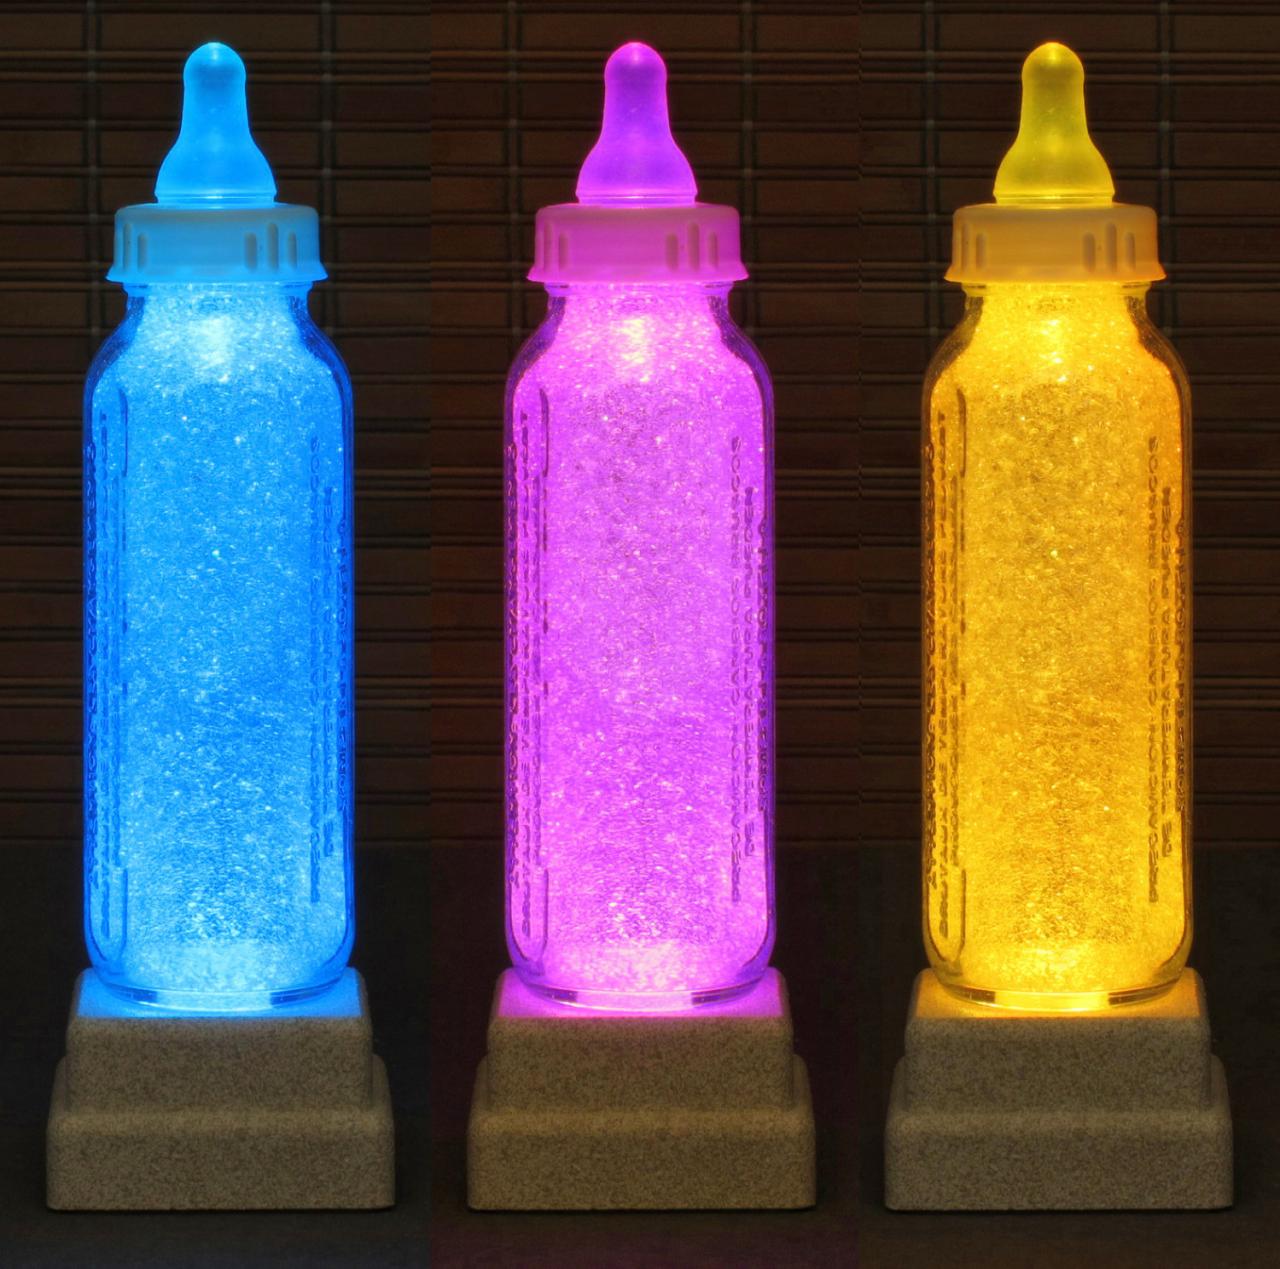 Evenflo Glass Baby Bottle Color Changing Lamp Night Light Remote Control 8 Oz Nursery Night Light